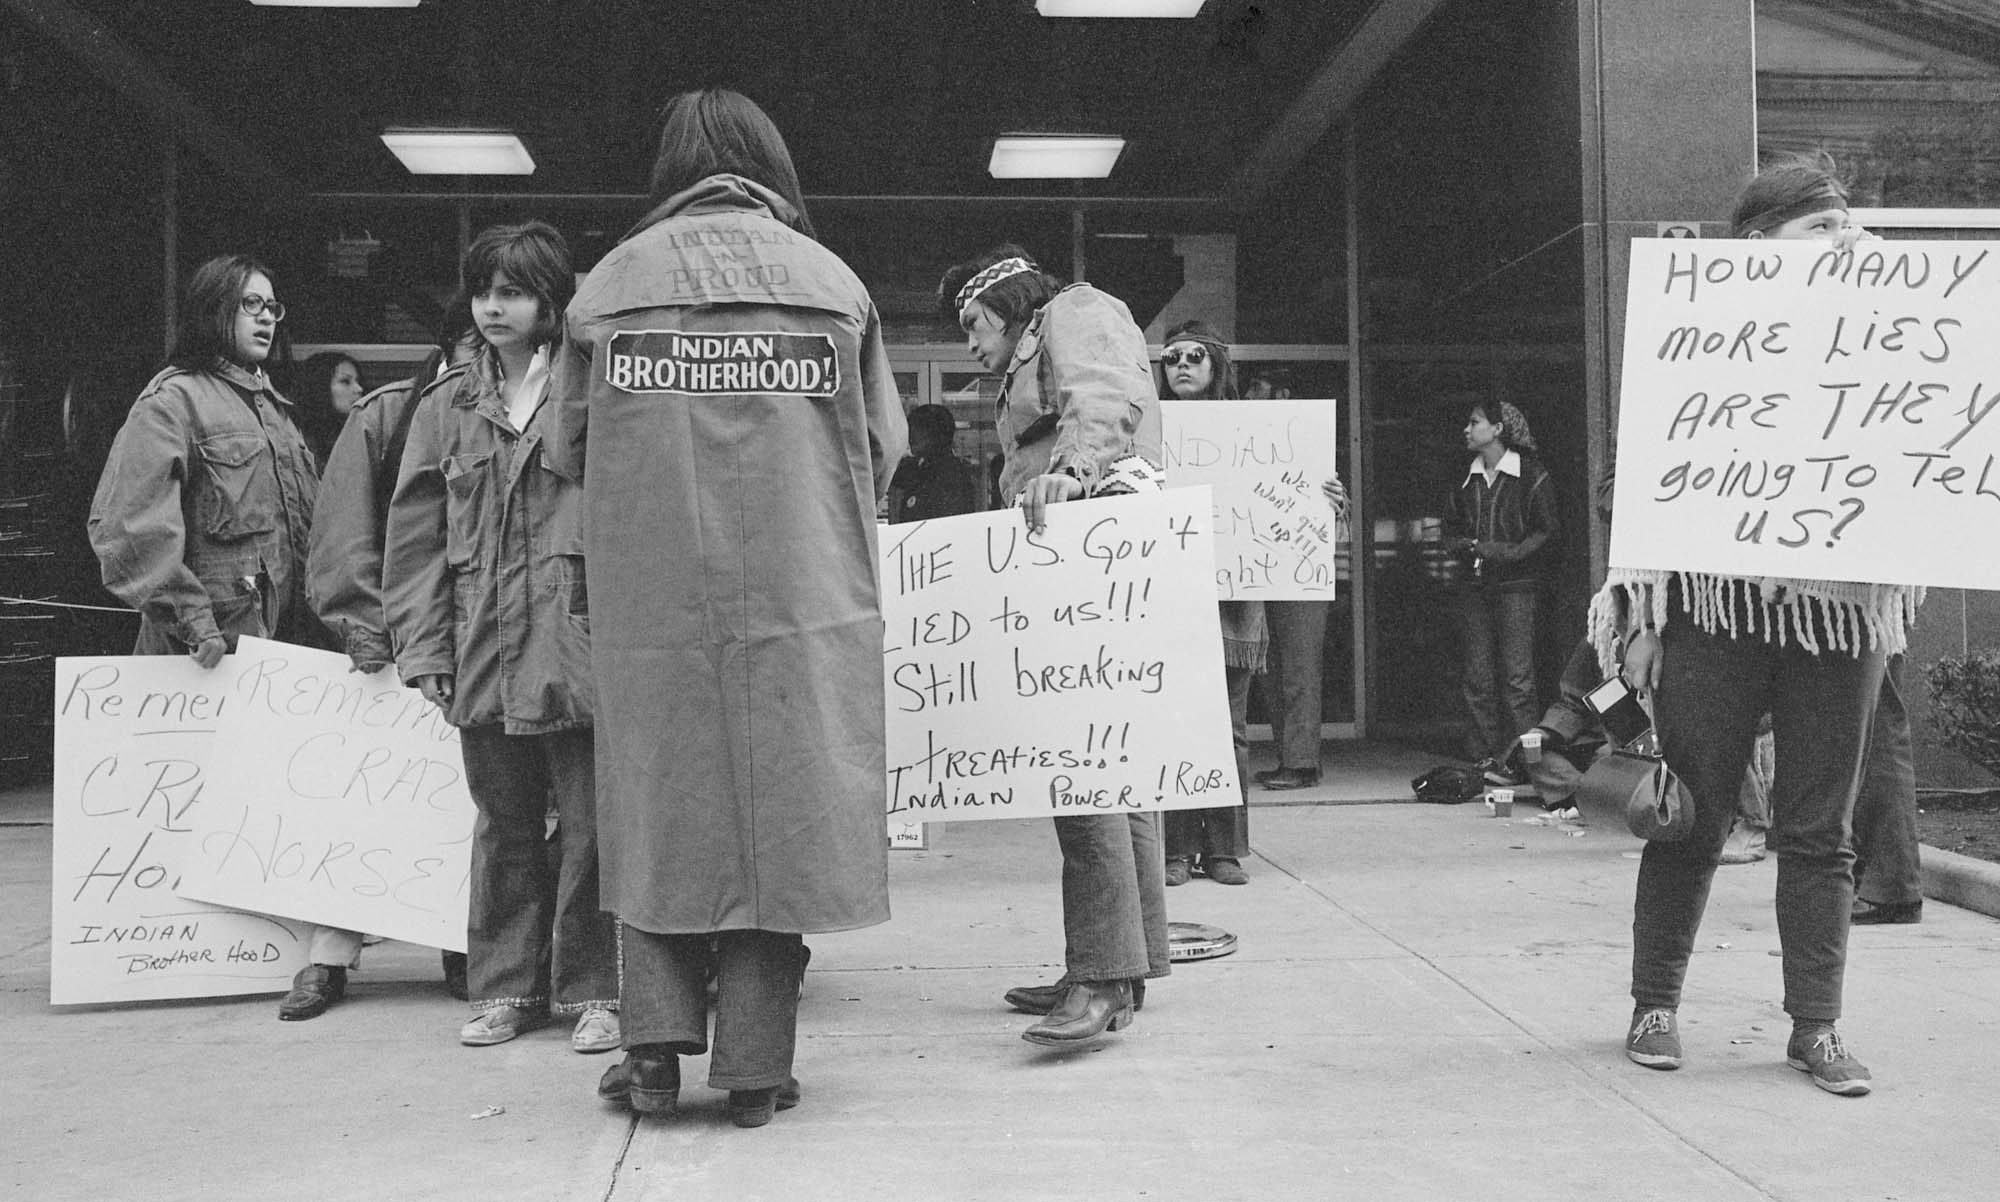 Provided by Minnesota Historical Society Press. Photos by Dick Bancroft ‚ A group of AIM women protest at the front door of the US Courthouse in Minneapolis. This is a black-and-white photo of people holding signs outside the courthouse. One with back to camera wears a coat with sign on back saying‚”Indian Brotherhood.”